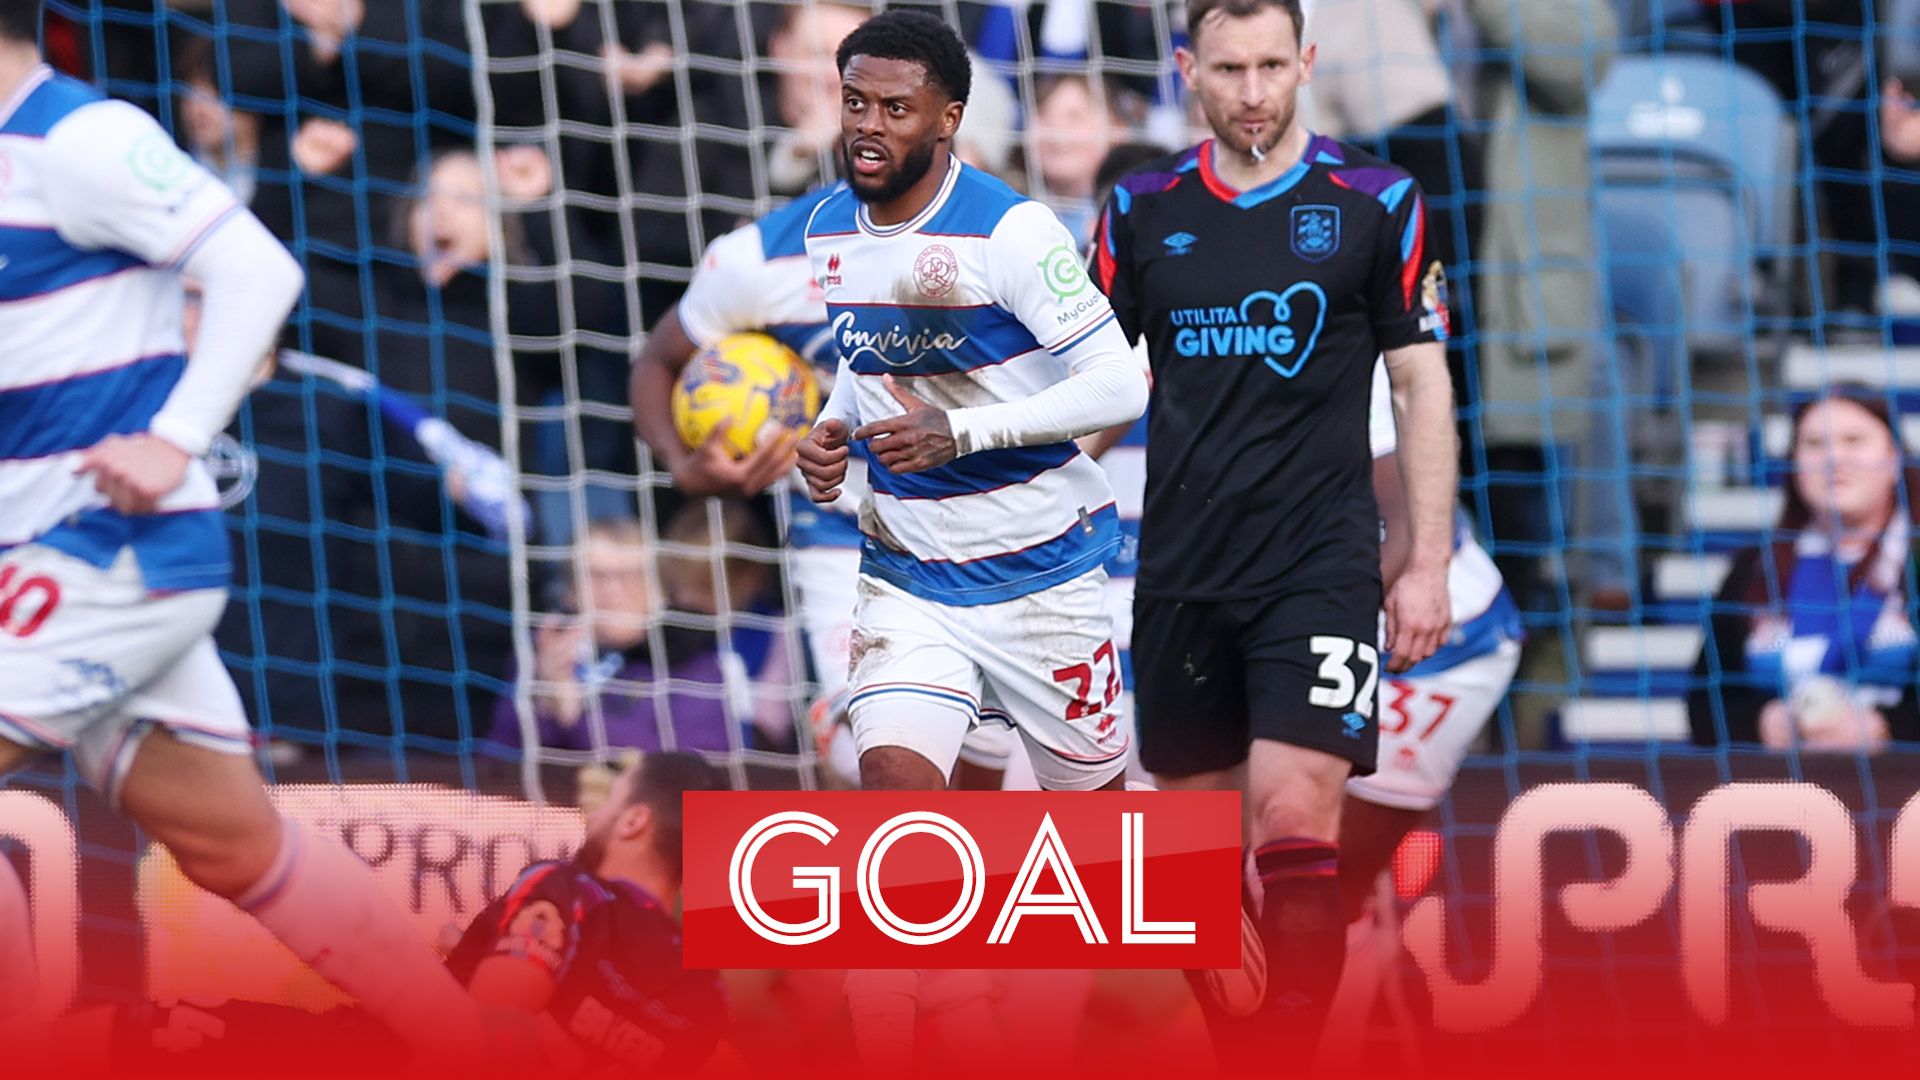 'There's the leveller!' | Paal pegs back The Terriers late on!